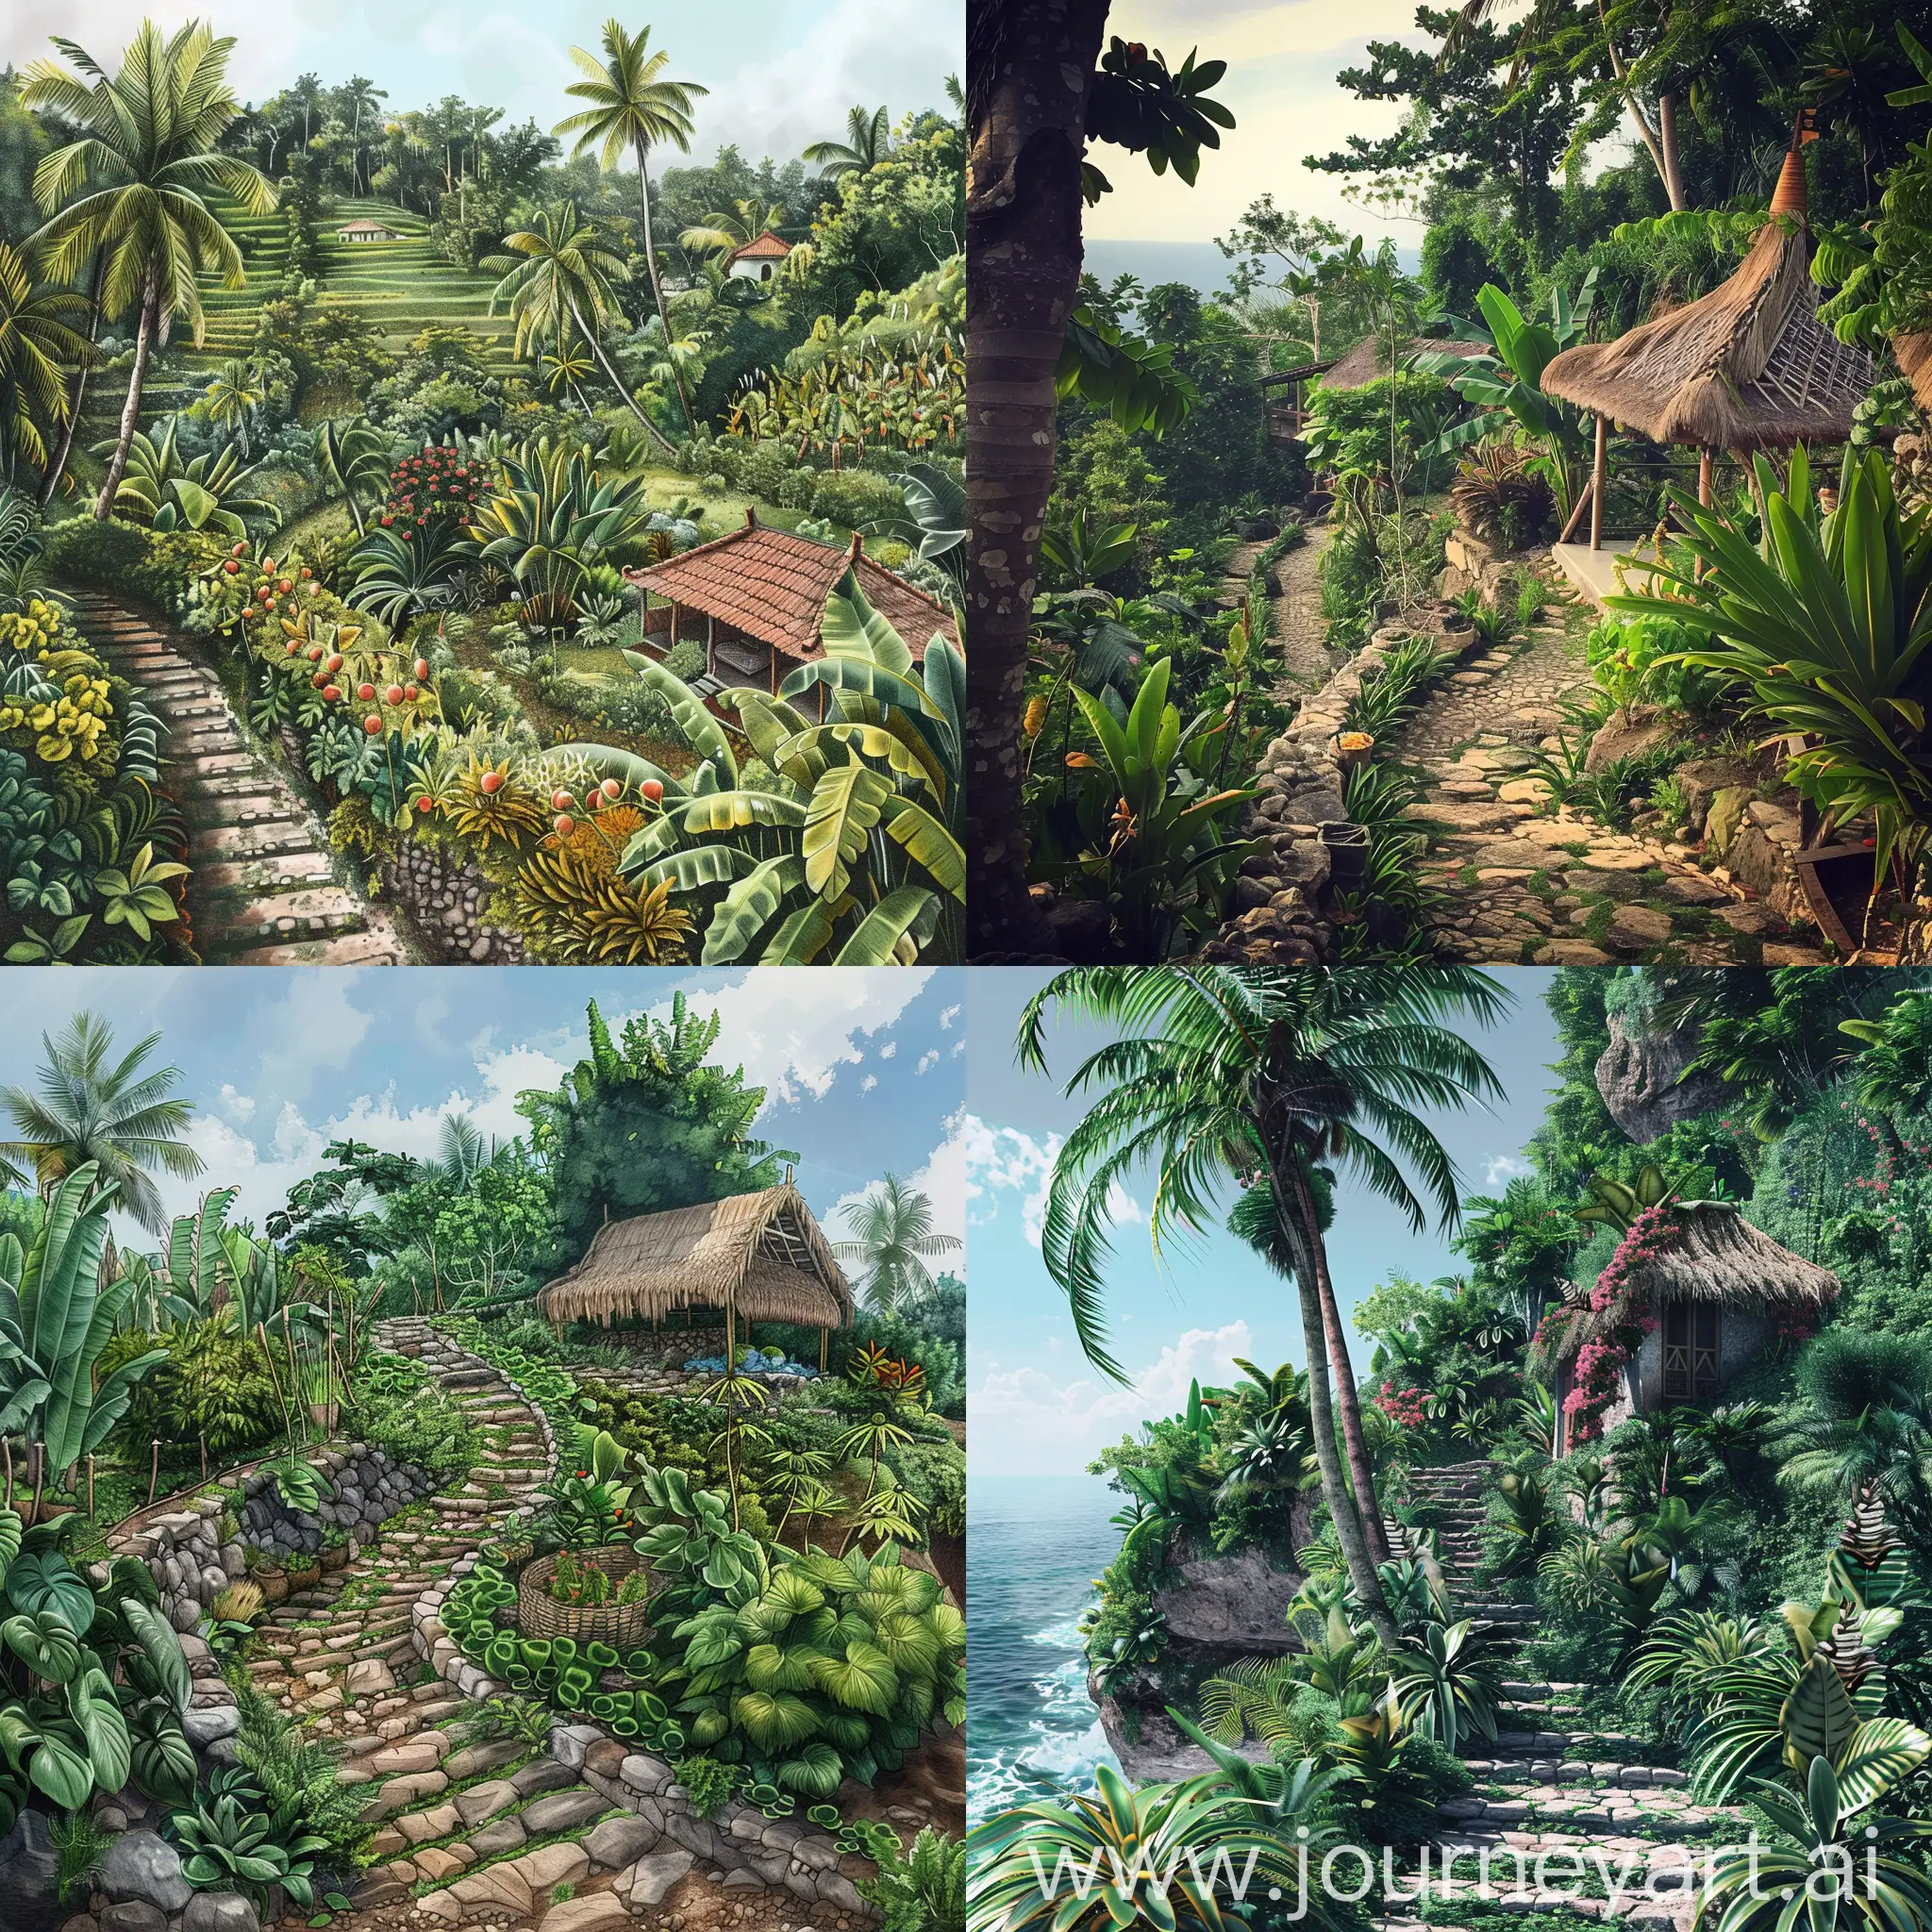 Draw me a photorealistic beautiful tropical garden with edible plants which can grow here on hill in Nusa Penida there is small limasan house too 